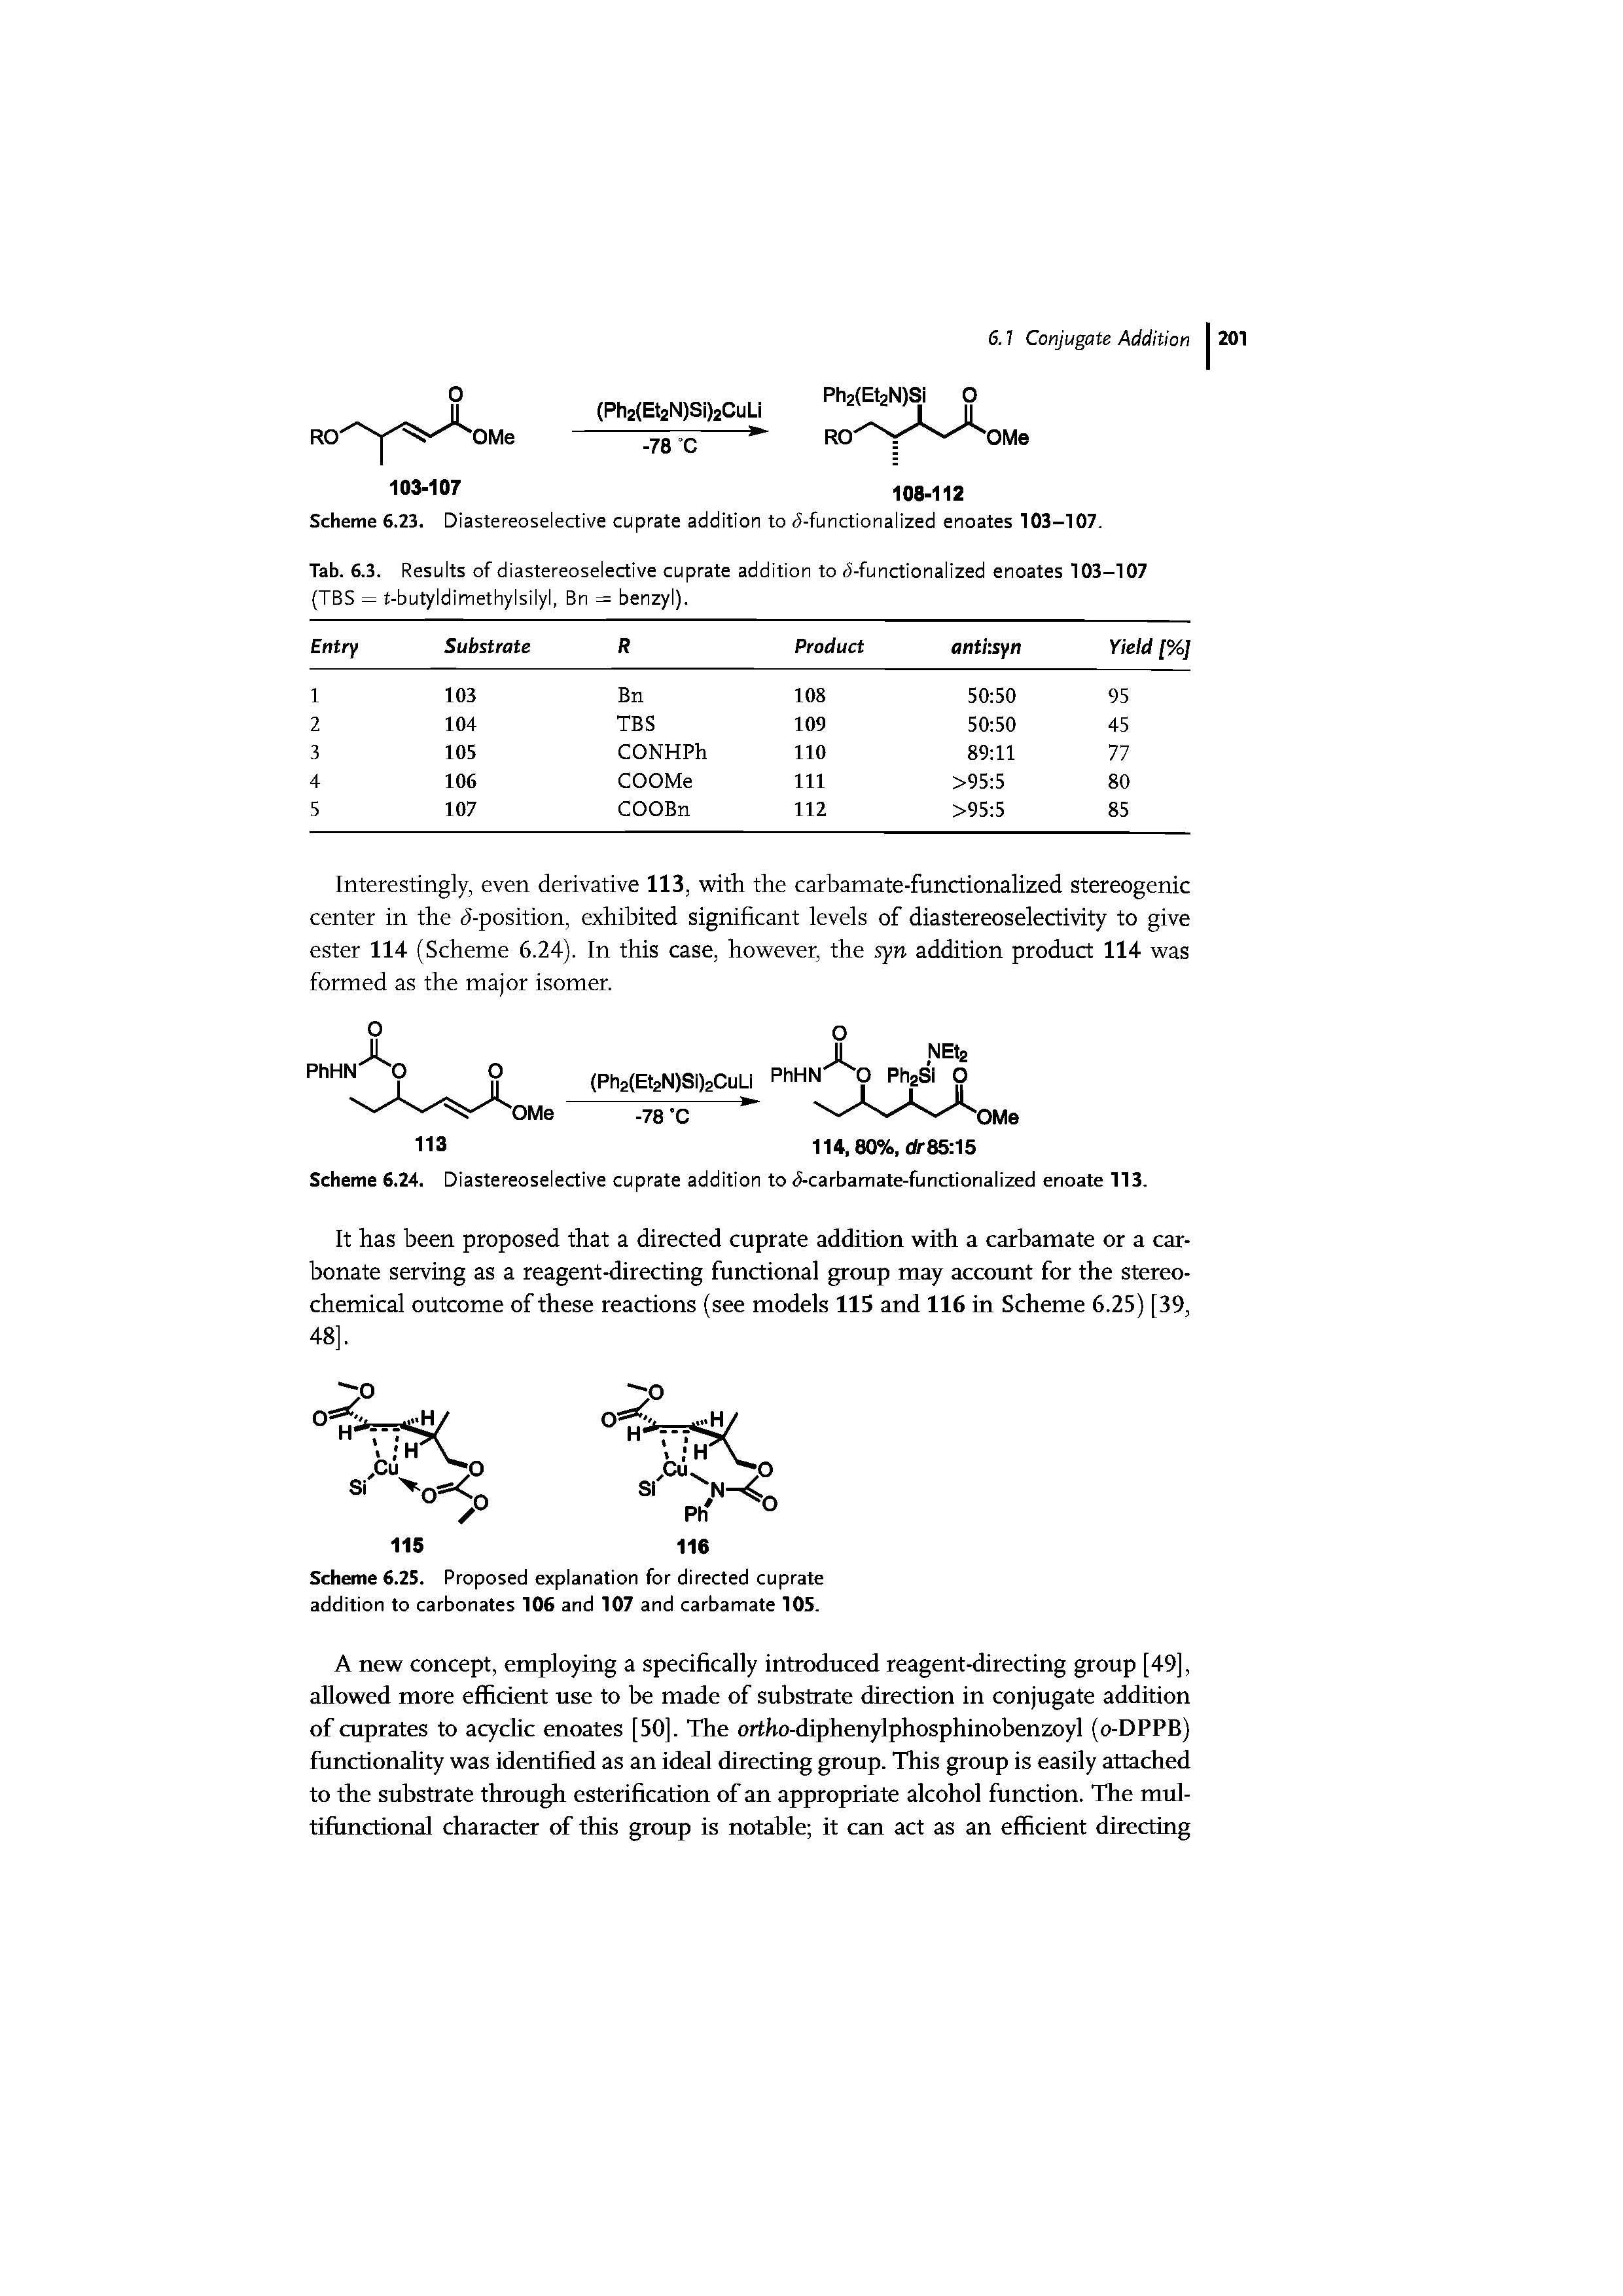 Tab. 6.3. Results of diastereoselective cuprate addition to <5-functionalized enoates 103-107 (TBS = t-butyidimethylsilyl, Bn = benzyl).